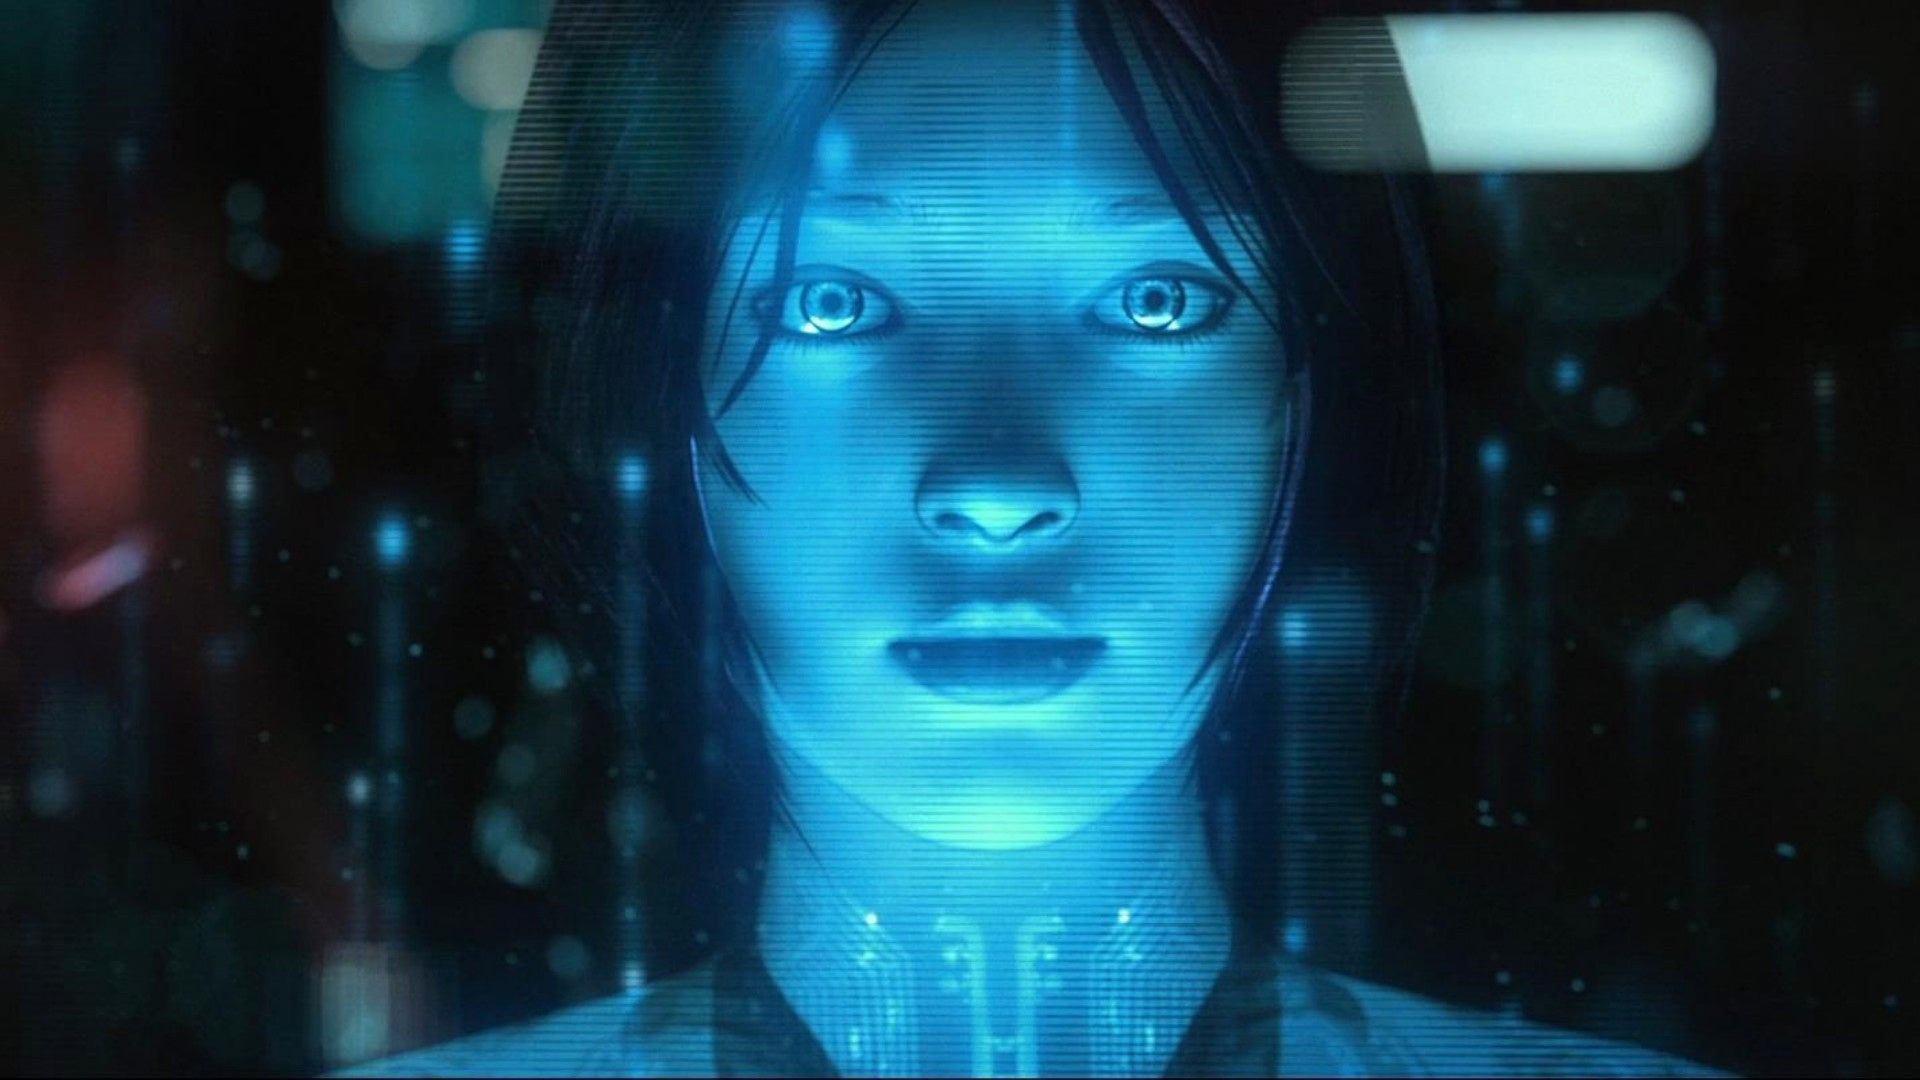 Cortana as she appears in the Halo 4 videogame